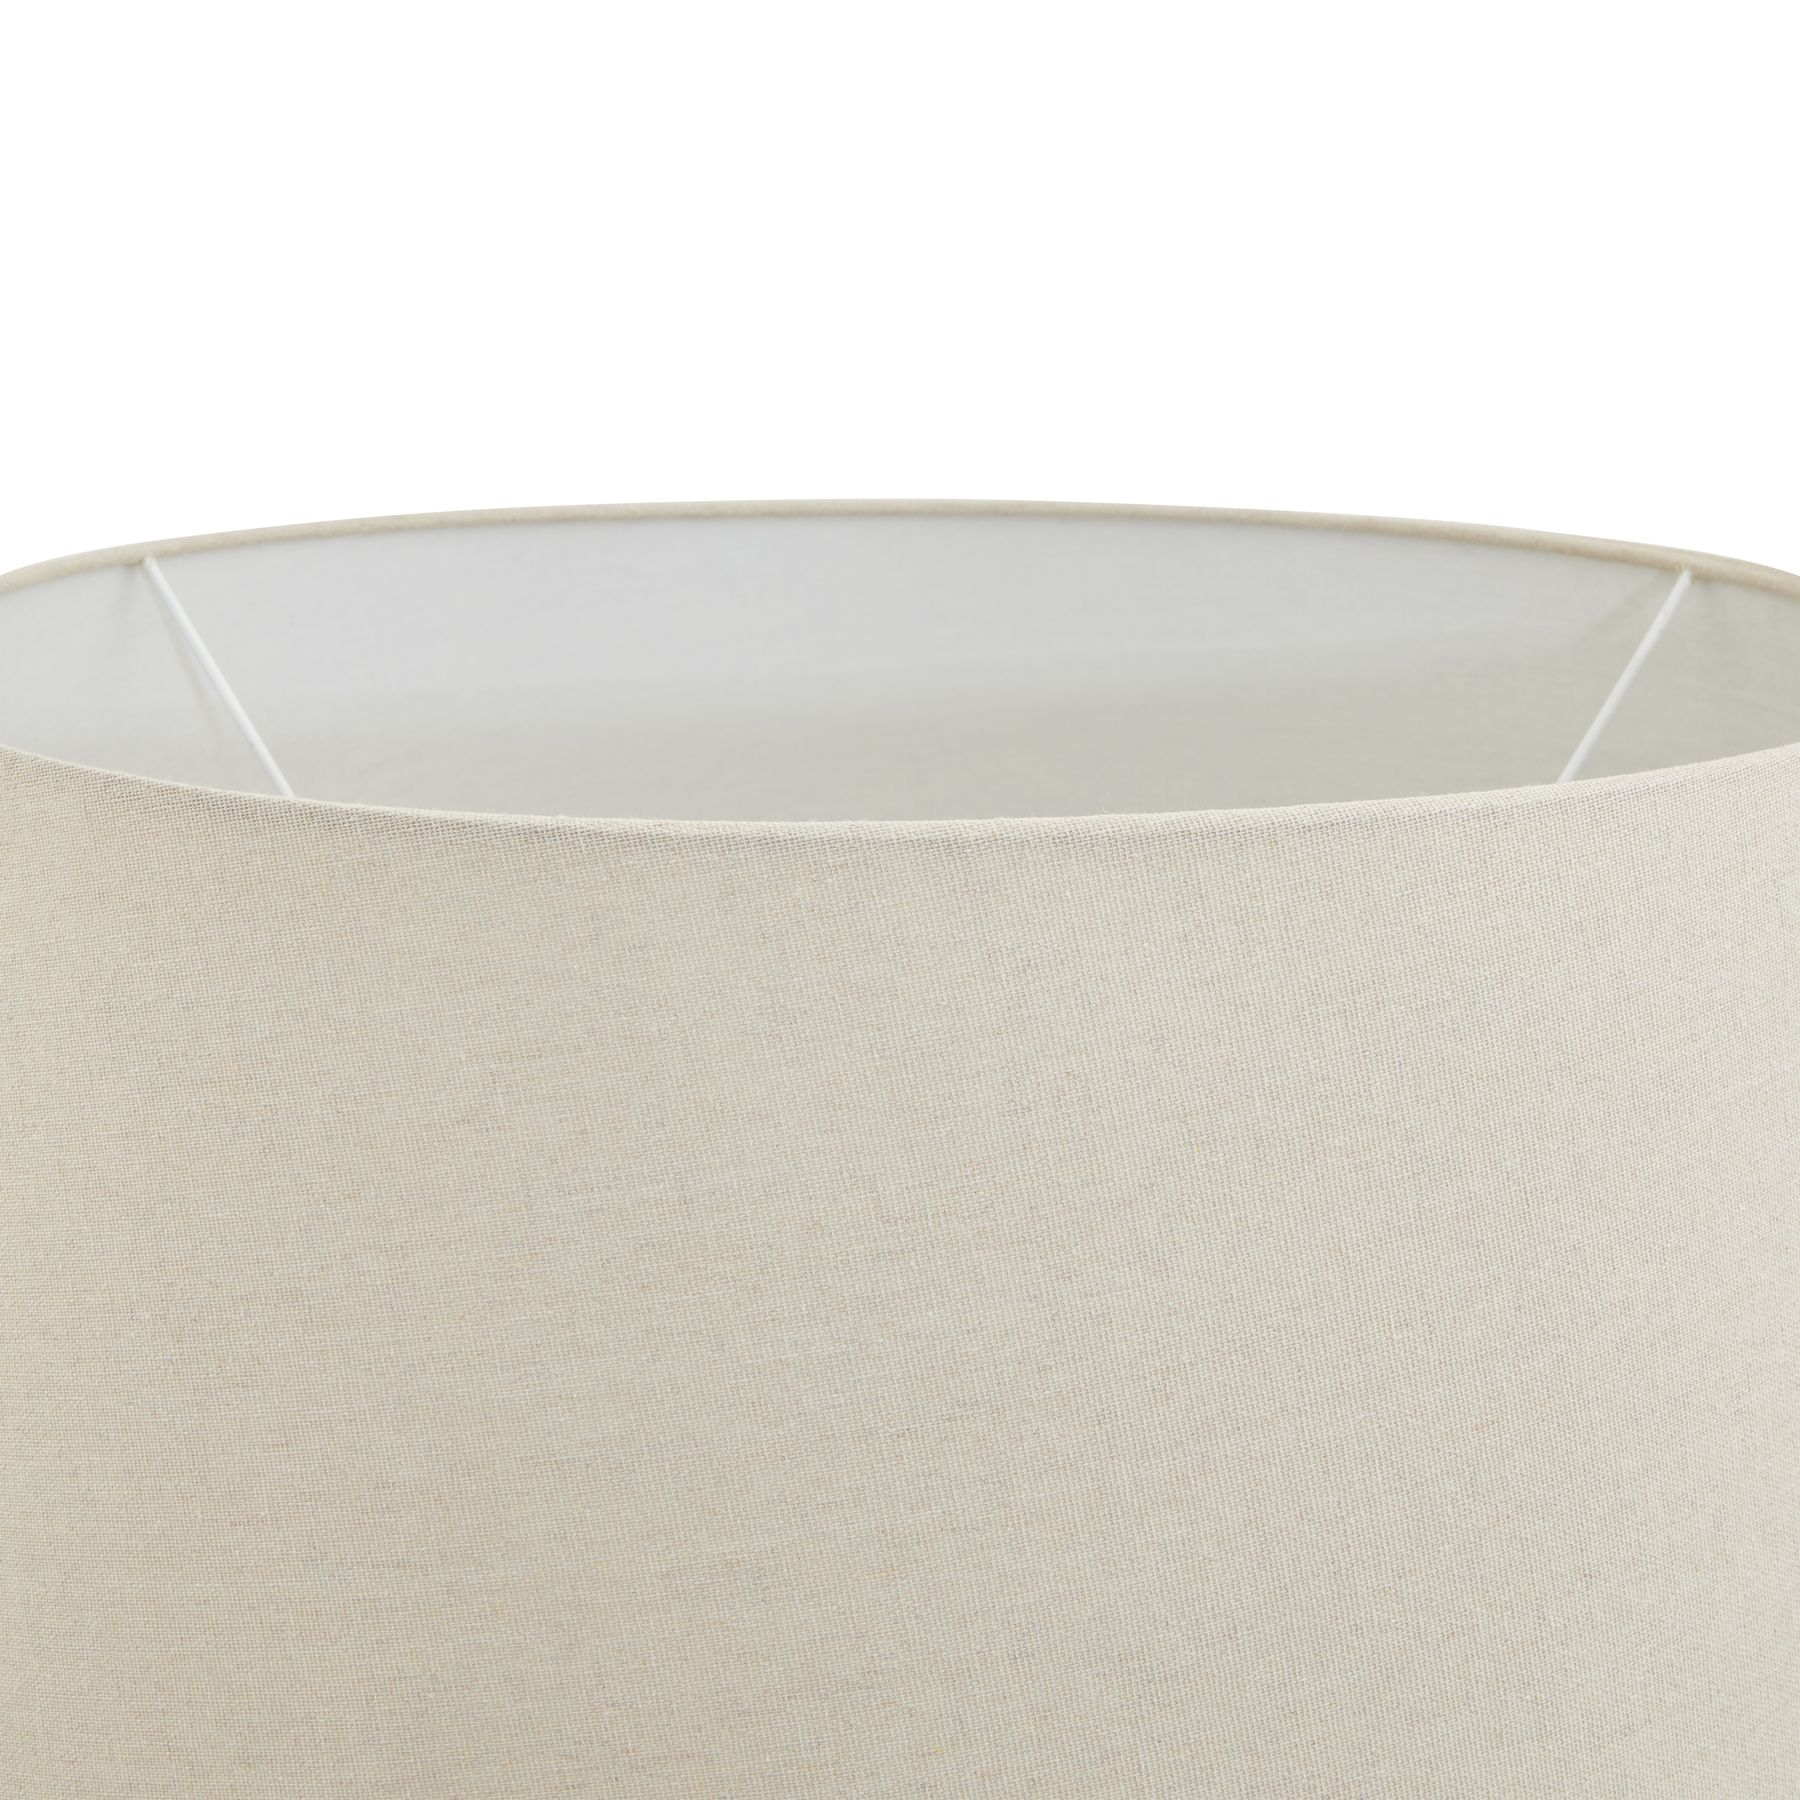 Darcy Antique White Pillar Table Lamp With Linen Shade - Image 3